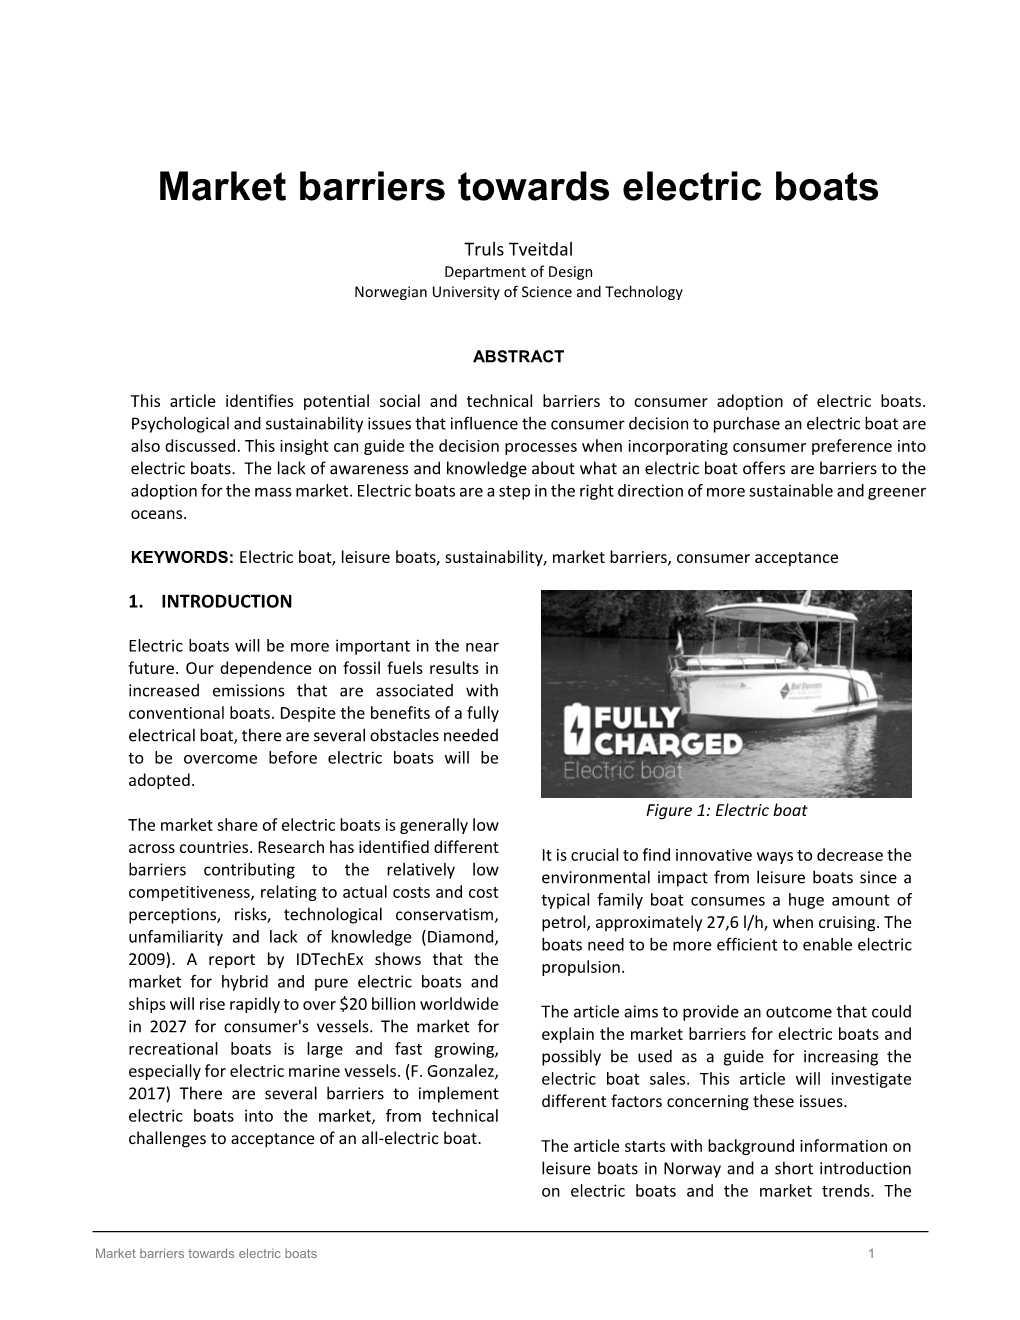 Market Barriers Towards Electric Boats